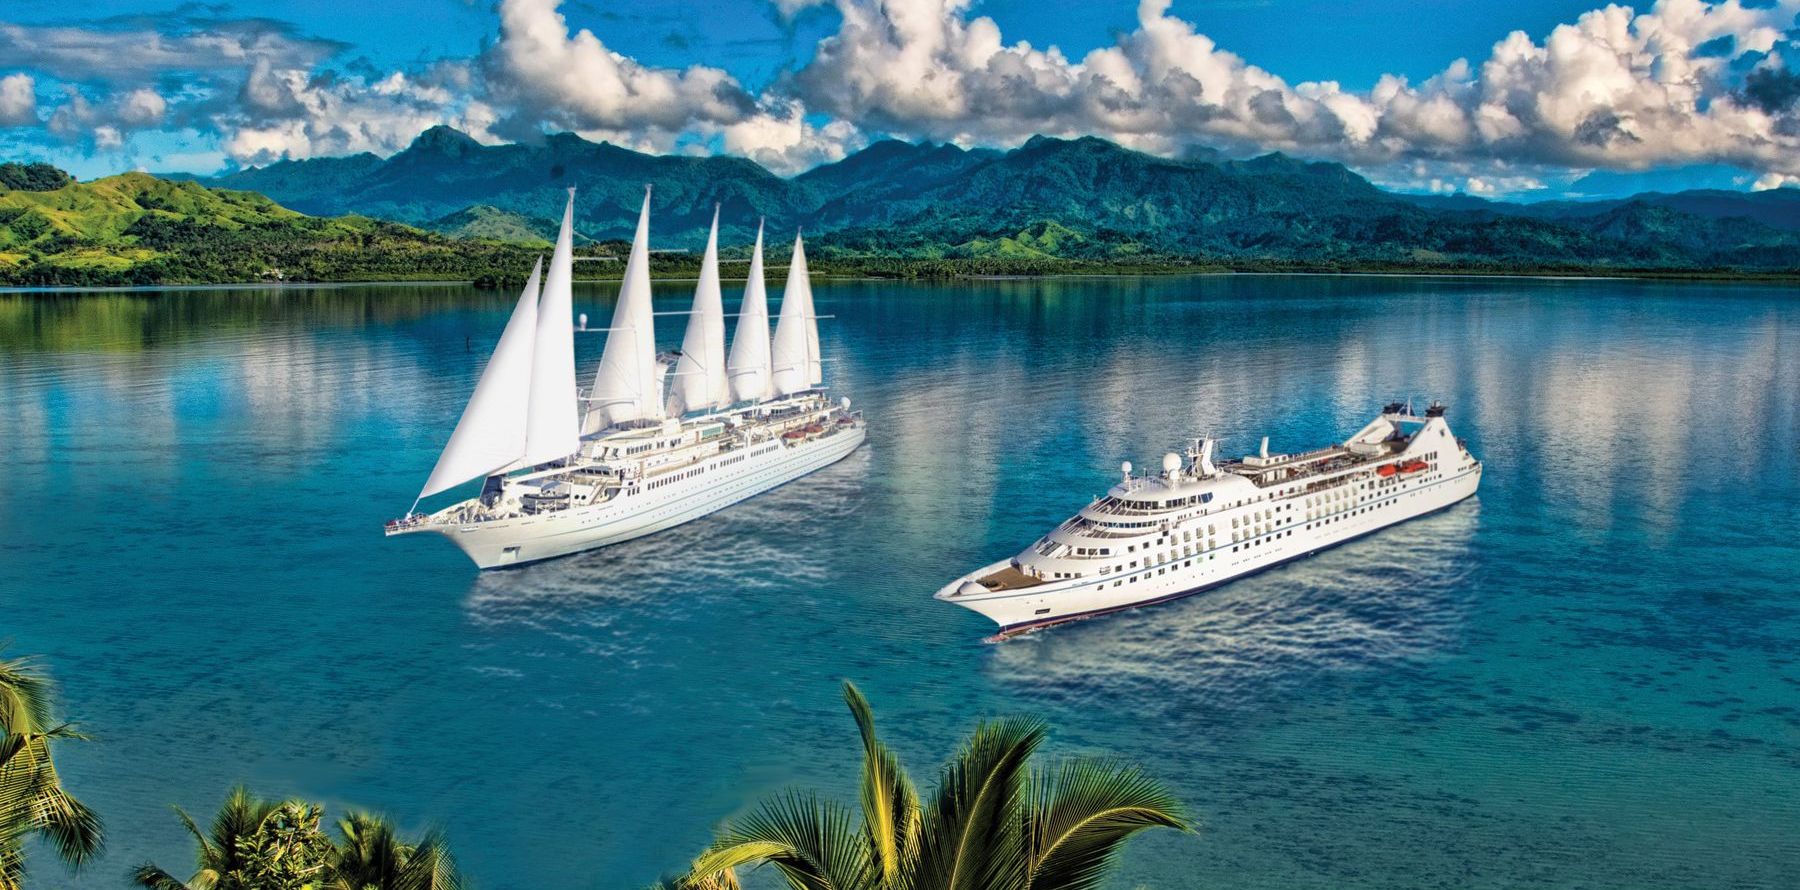 Windstar Cruise Ships sailing on the water